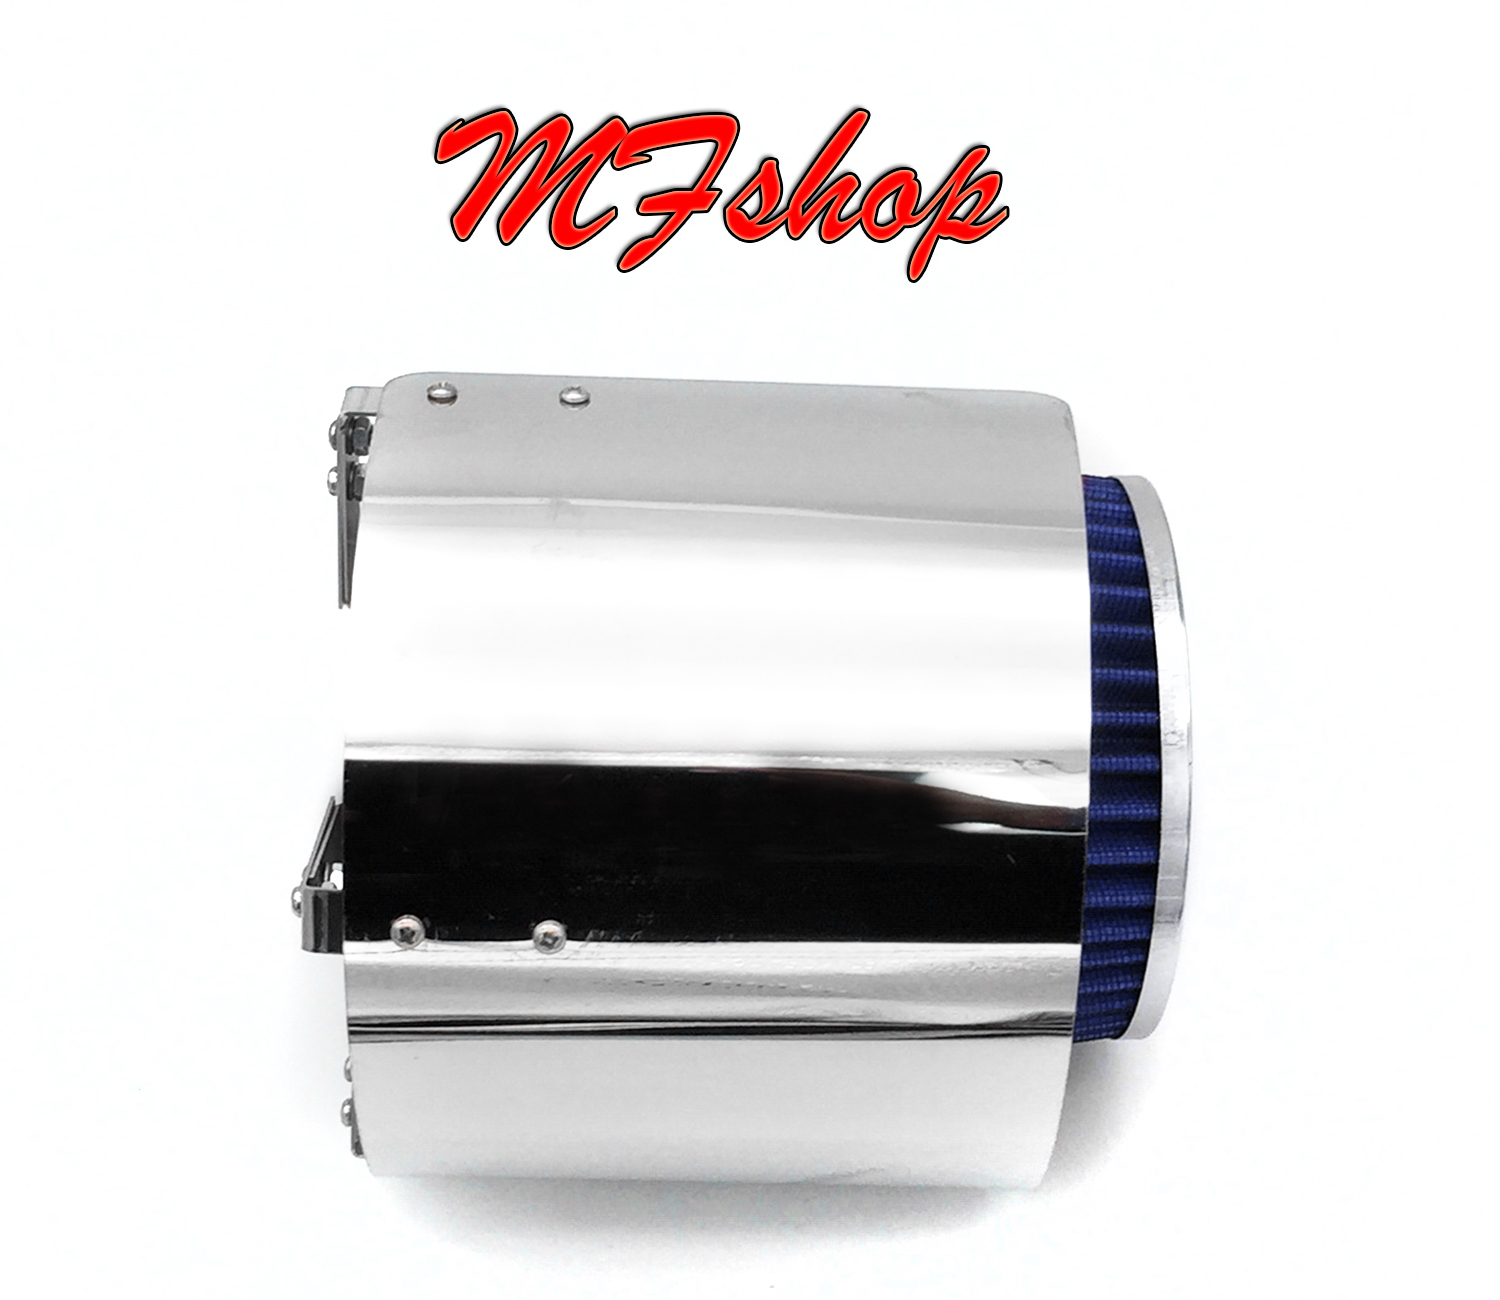 BLUE 2.75 70mm Intake Filter For Civic Del Sol CRX Accord + Chrome Heat Shield